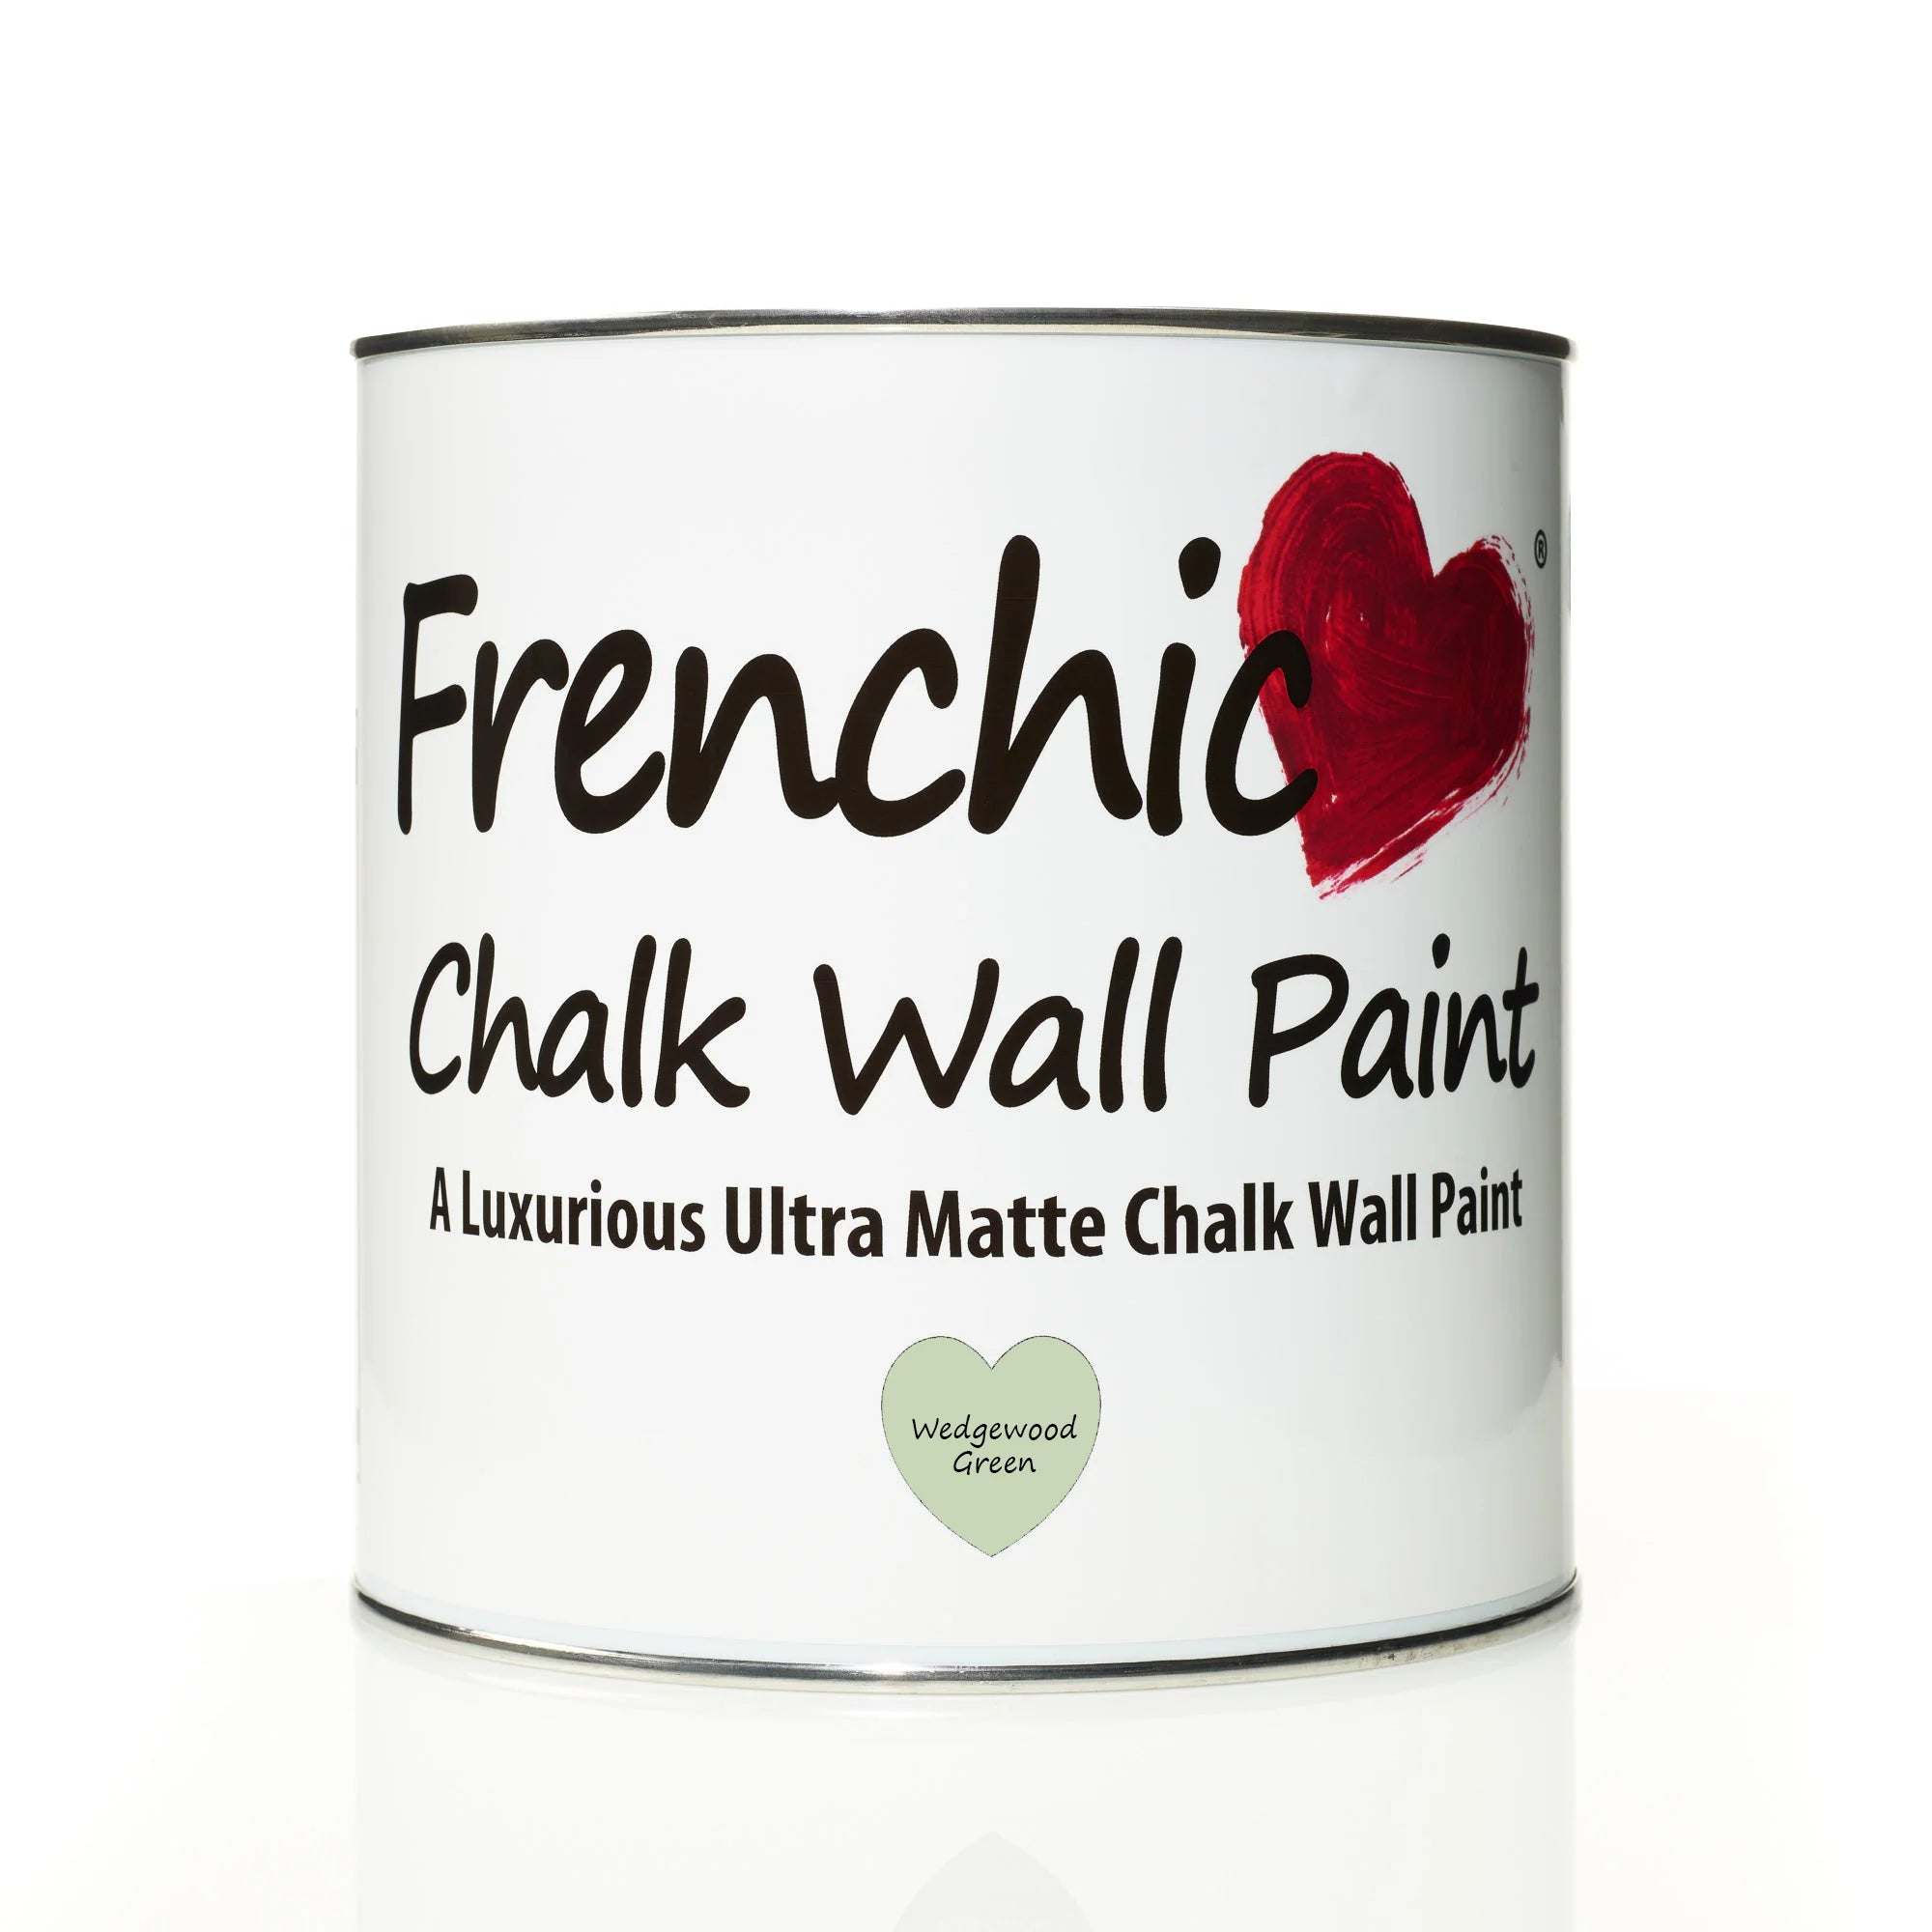 Frenchic Paint Wedgewood Green Wall Paint 2.5L Frenchic Paint Chalk Wall Paint Range by Weirs of Baggot Street Irelands Largest and most Trusted Stockist of Frenchic Paint. Shop online for Nationwide and Same Day Dublin Delivery